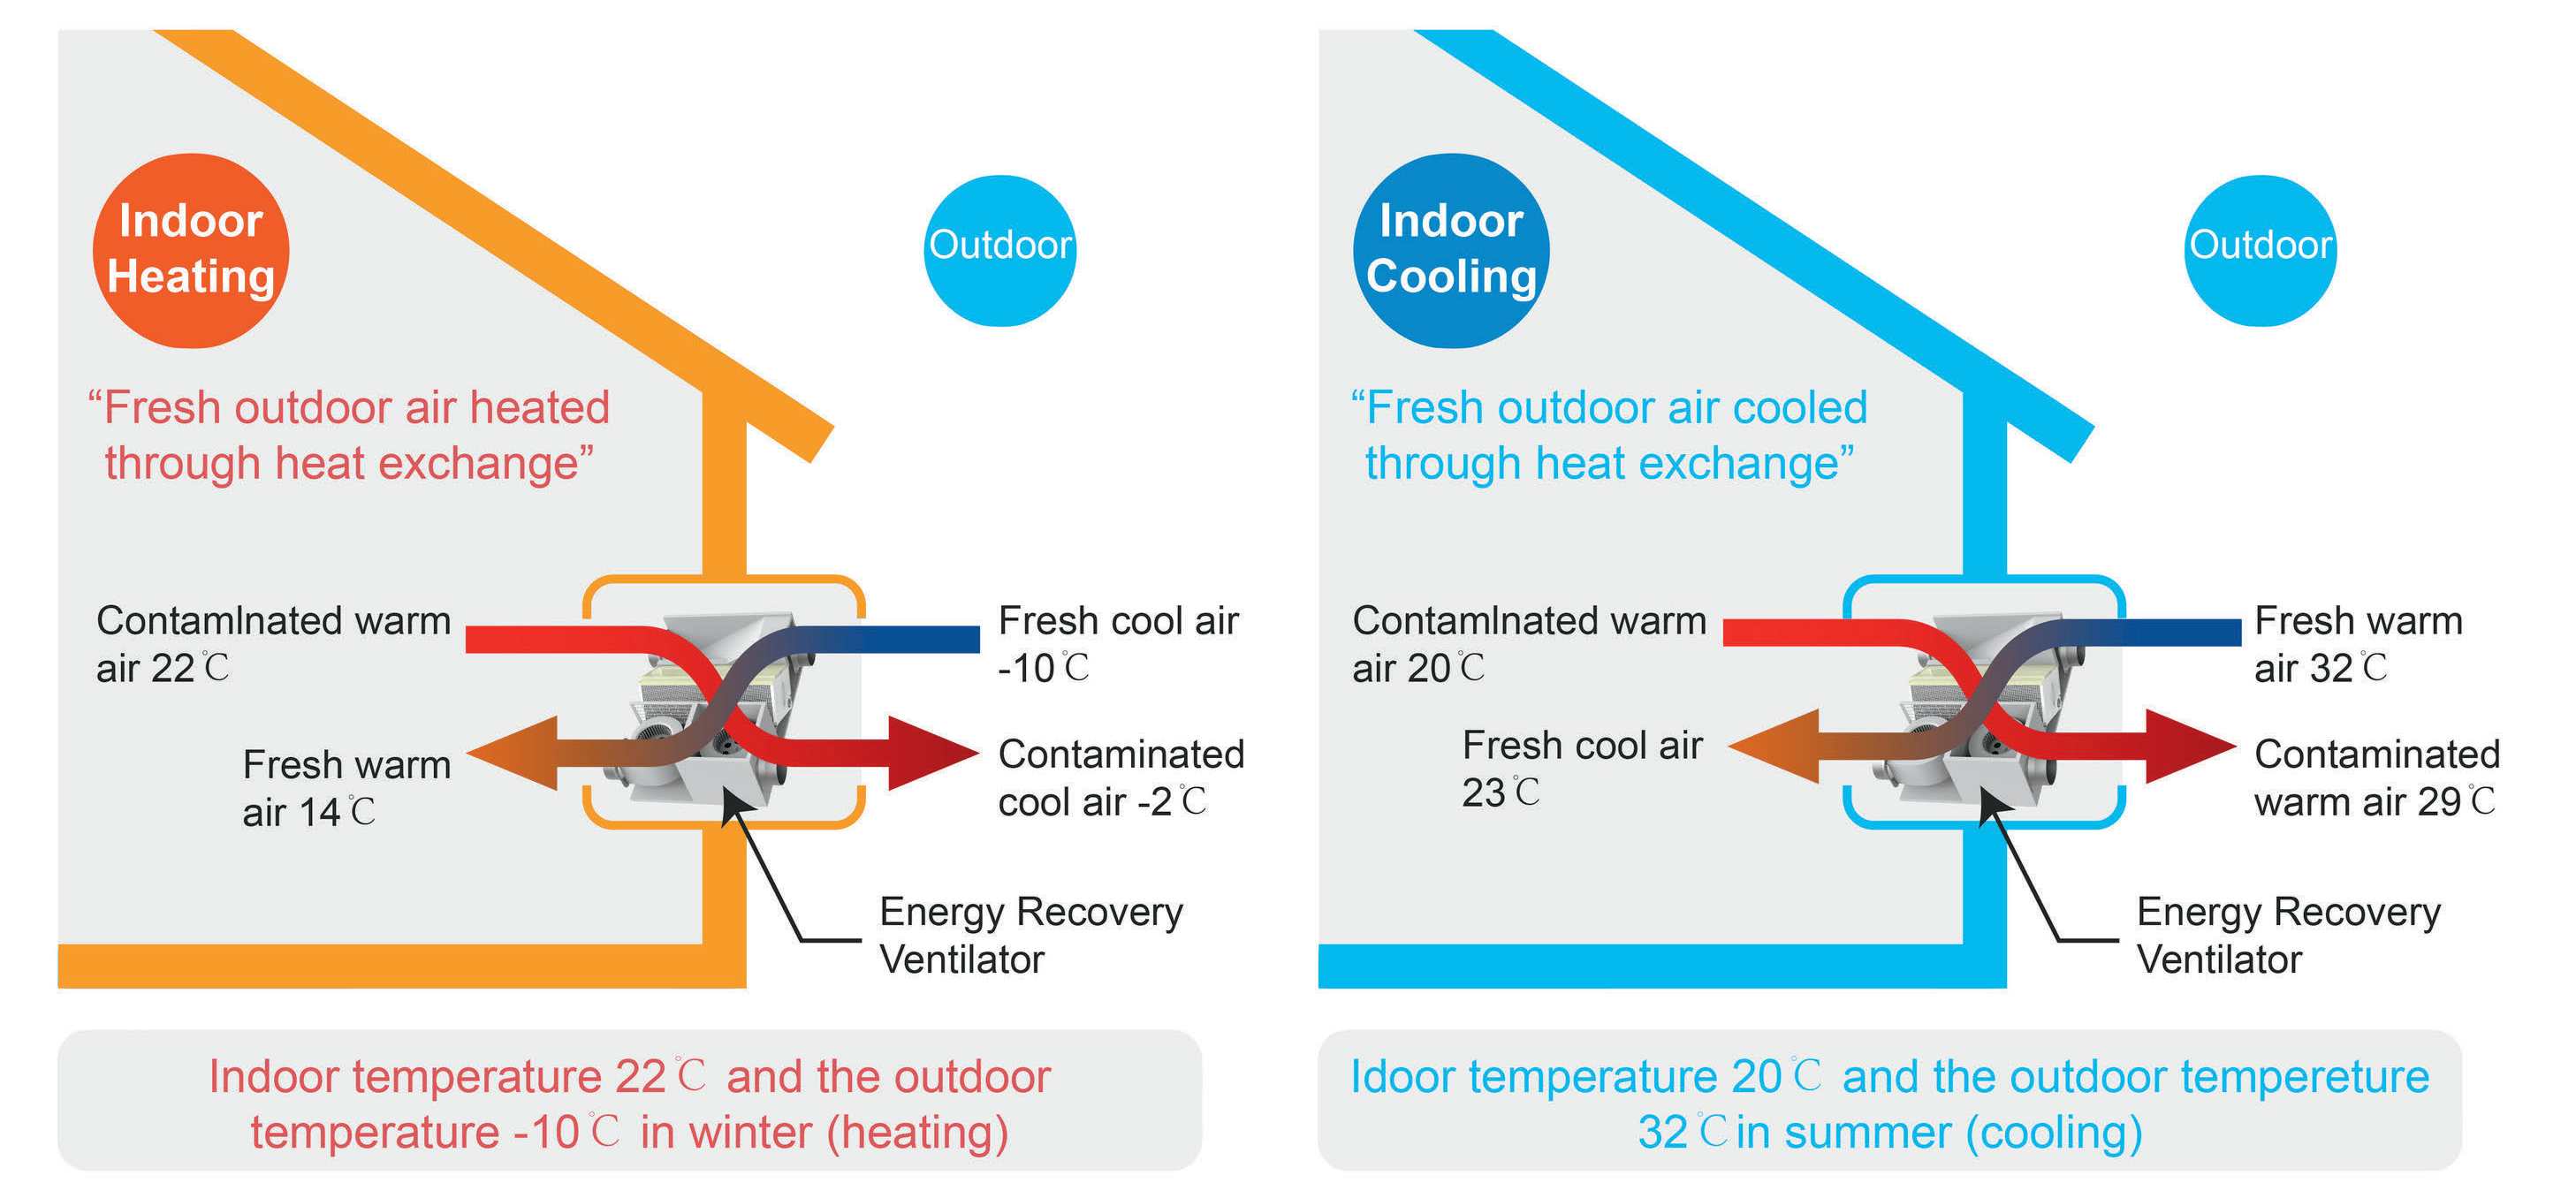 Heat Recovery Ventilator Working Principle - Efficiently recovers heat from exhaust air to provide fresh, filtered air